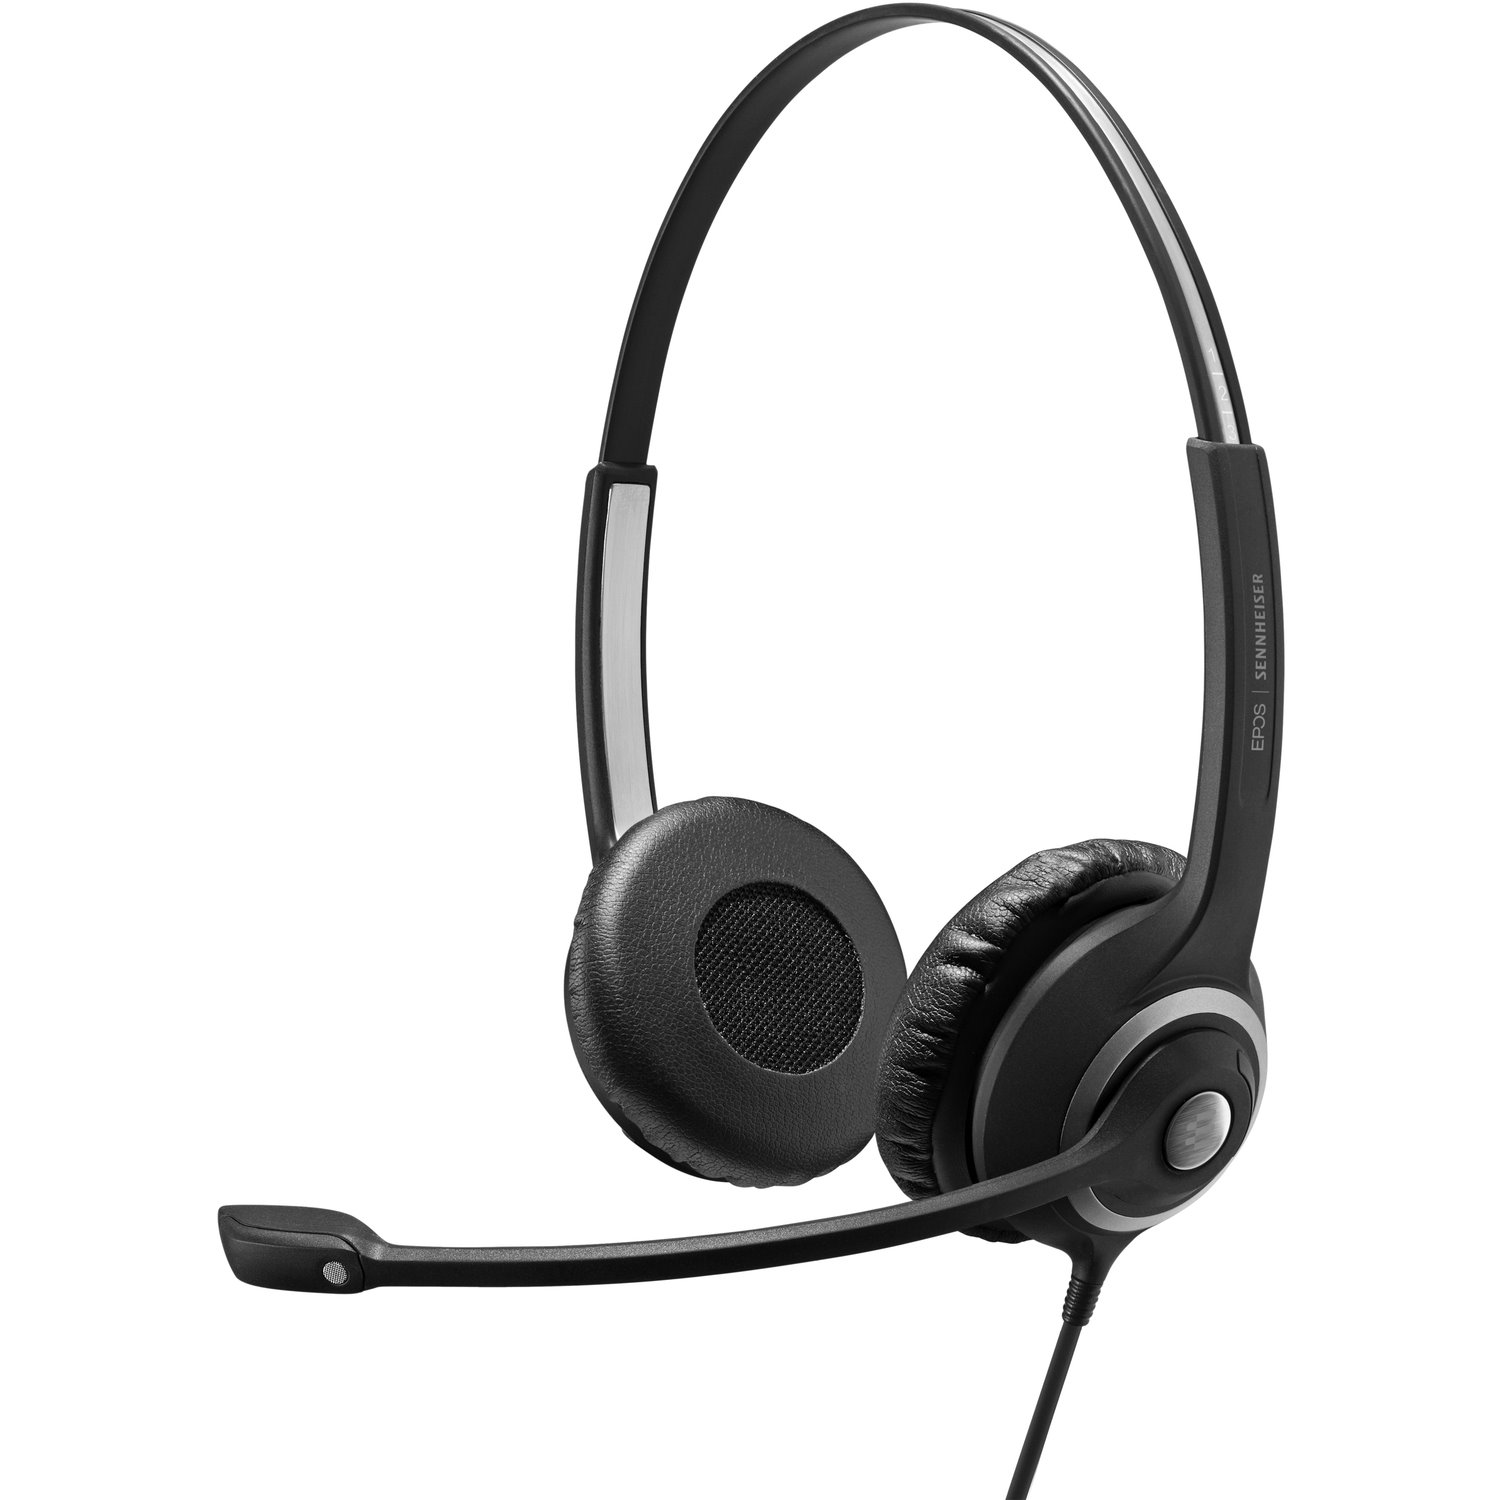 EPOS IMPACT SC 260 USB Wired On-ear Stereo Headset - Black